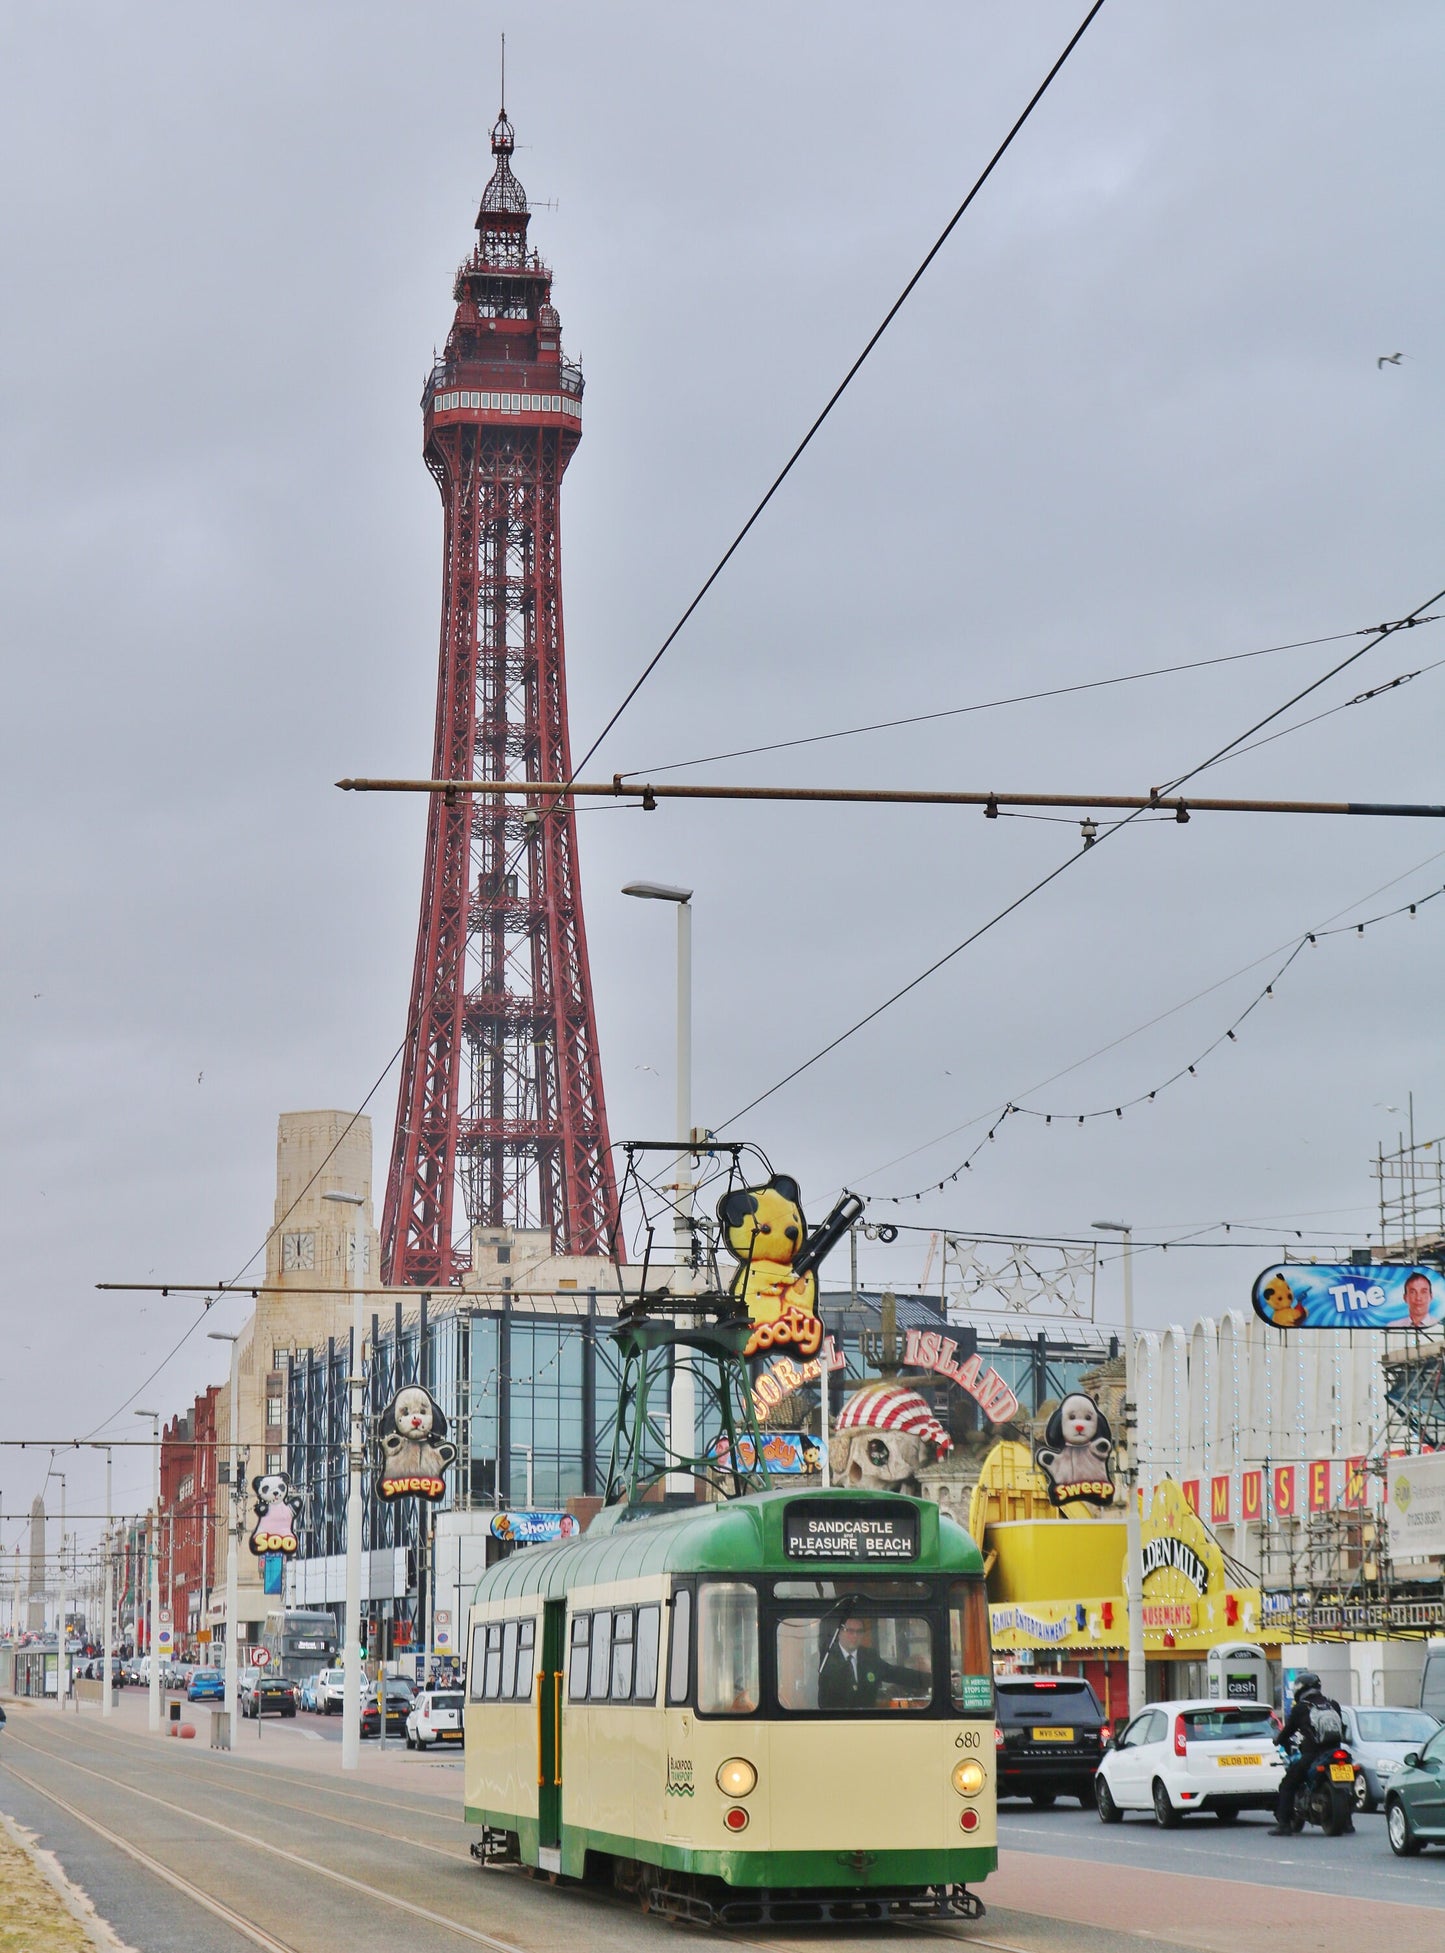 Blackpool Photography Print Blackpool Tower Tram Poster